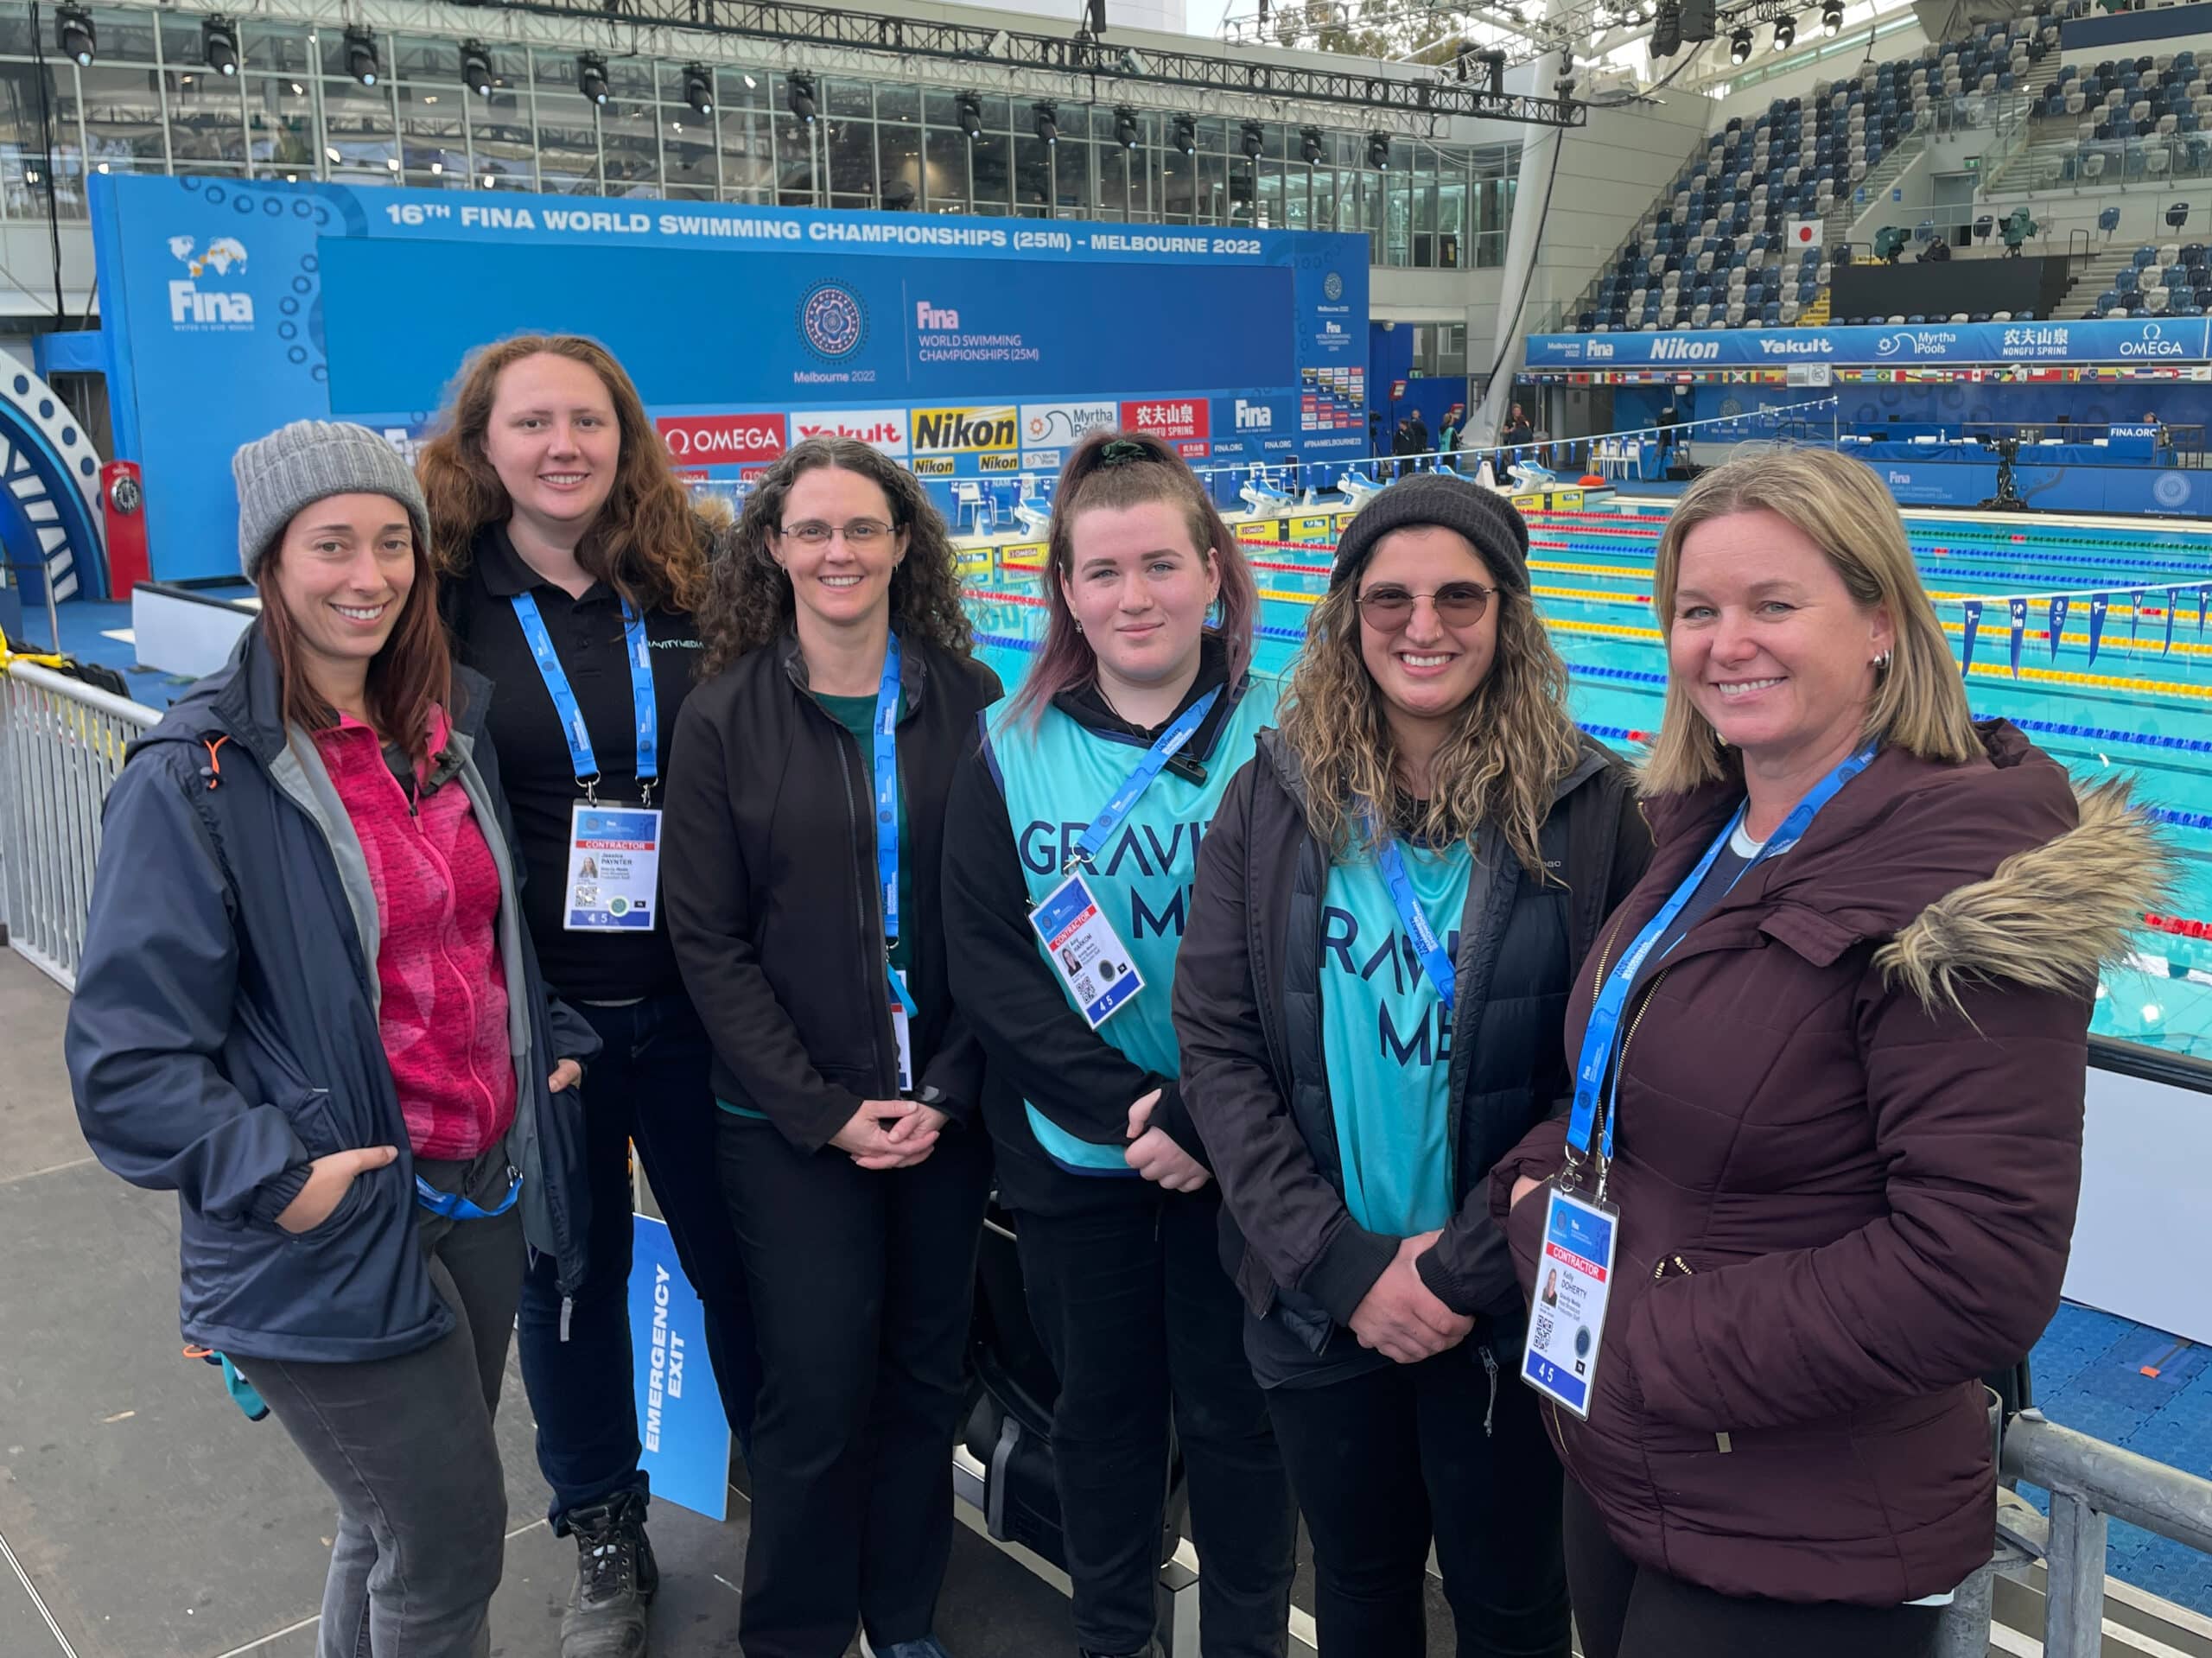 All-female team delivers a first for Gravity Media Australia at the FINA World Swimming Championships (25m) in Melbourne